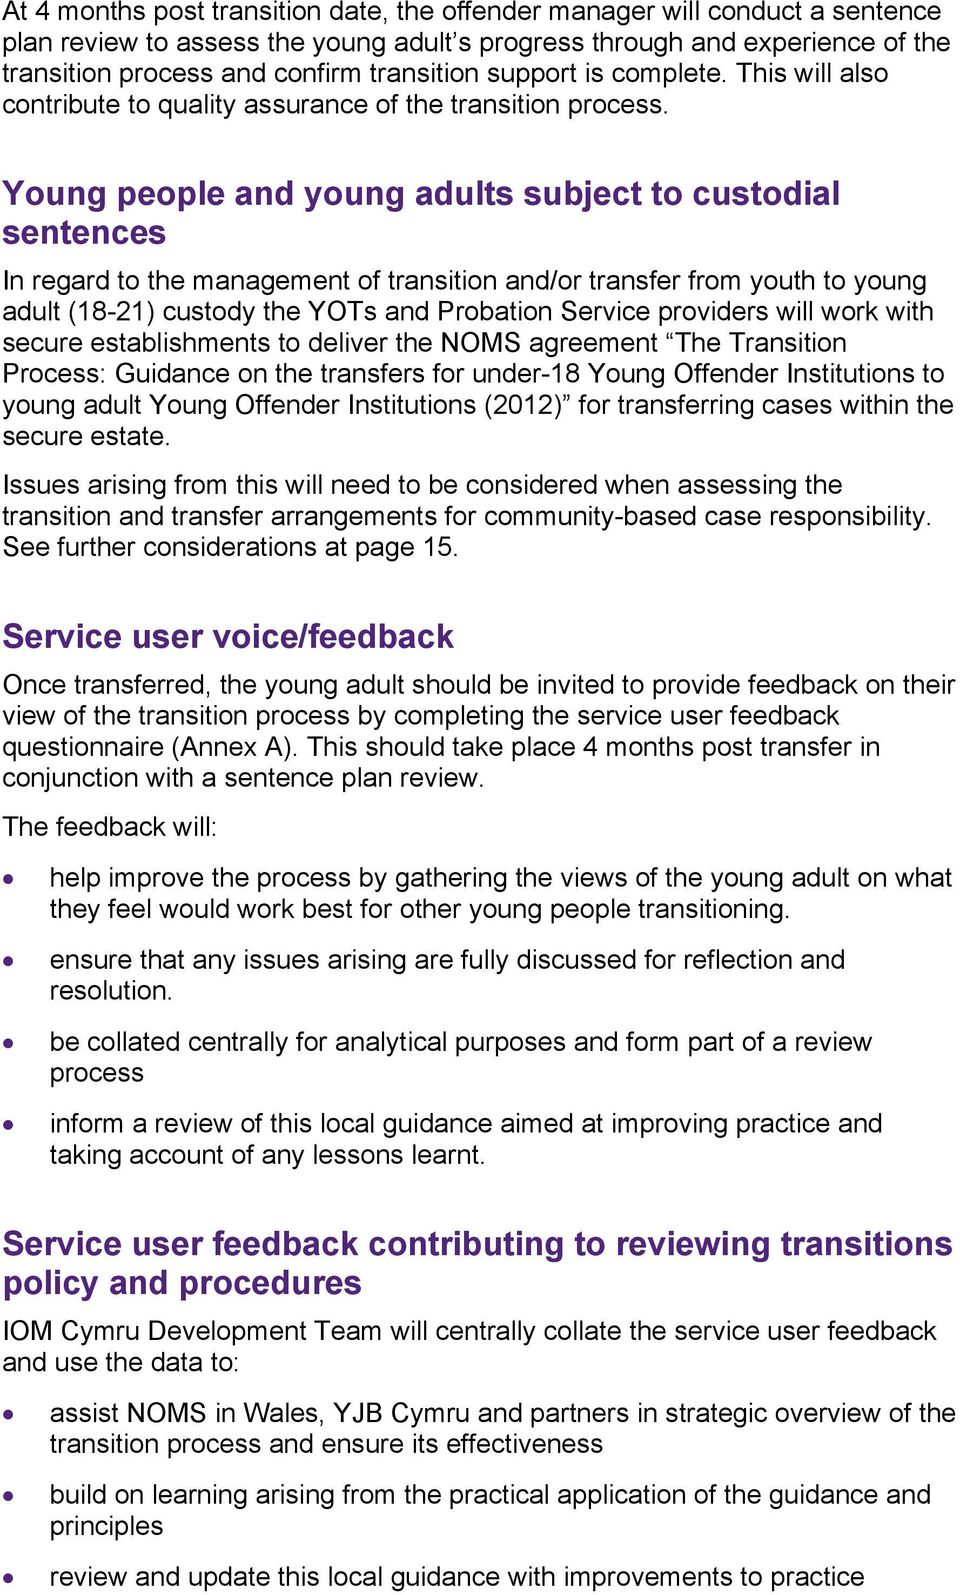 Young people and young adults subject to custodial sentences In regard to the management of transition and/or transfer from youth to young adult (18-21) custody the YOTs and Probation Service